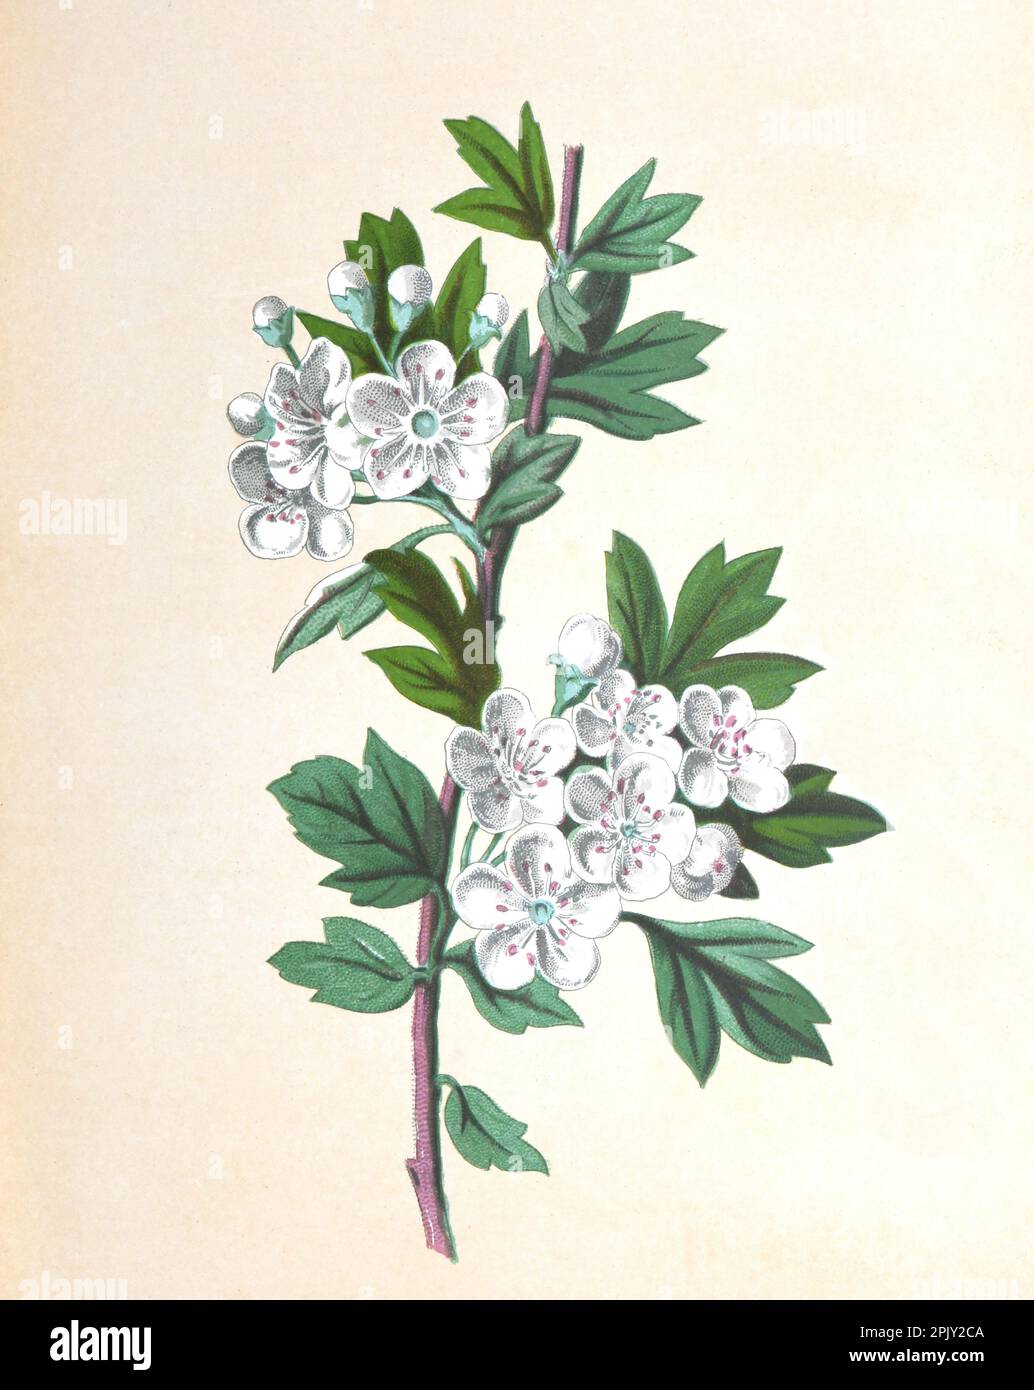 Hawthorn or Crateagus flower. (quickthorn or thornapple) may-tree, whitehorn or hawberry. Antique hand drawn flowers illustration. flower illustration. Stock Photo